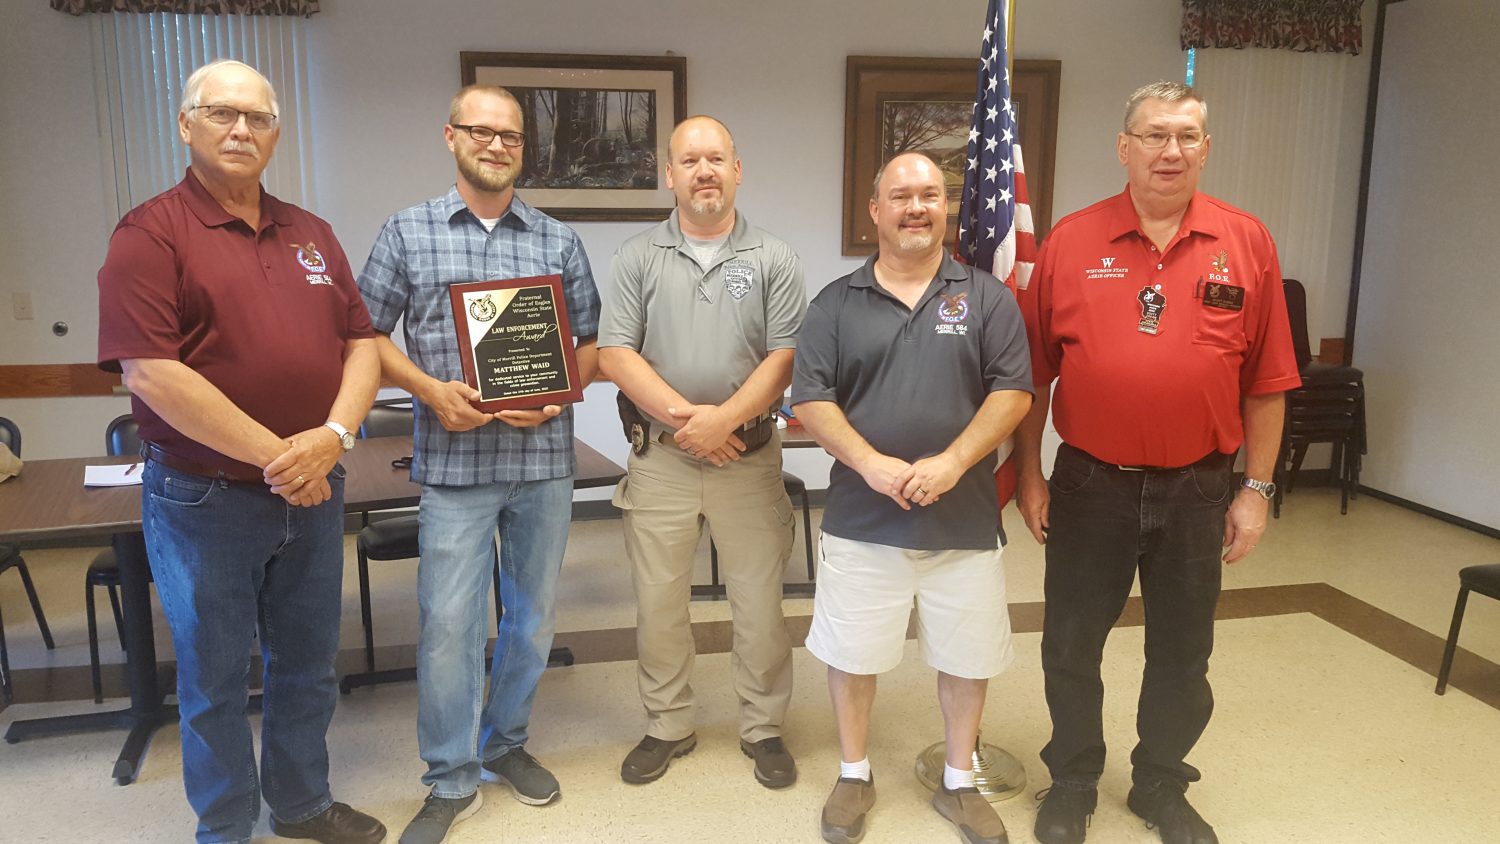 Waid named Law Enforcement Officer of the Year